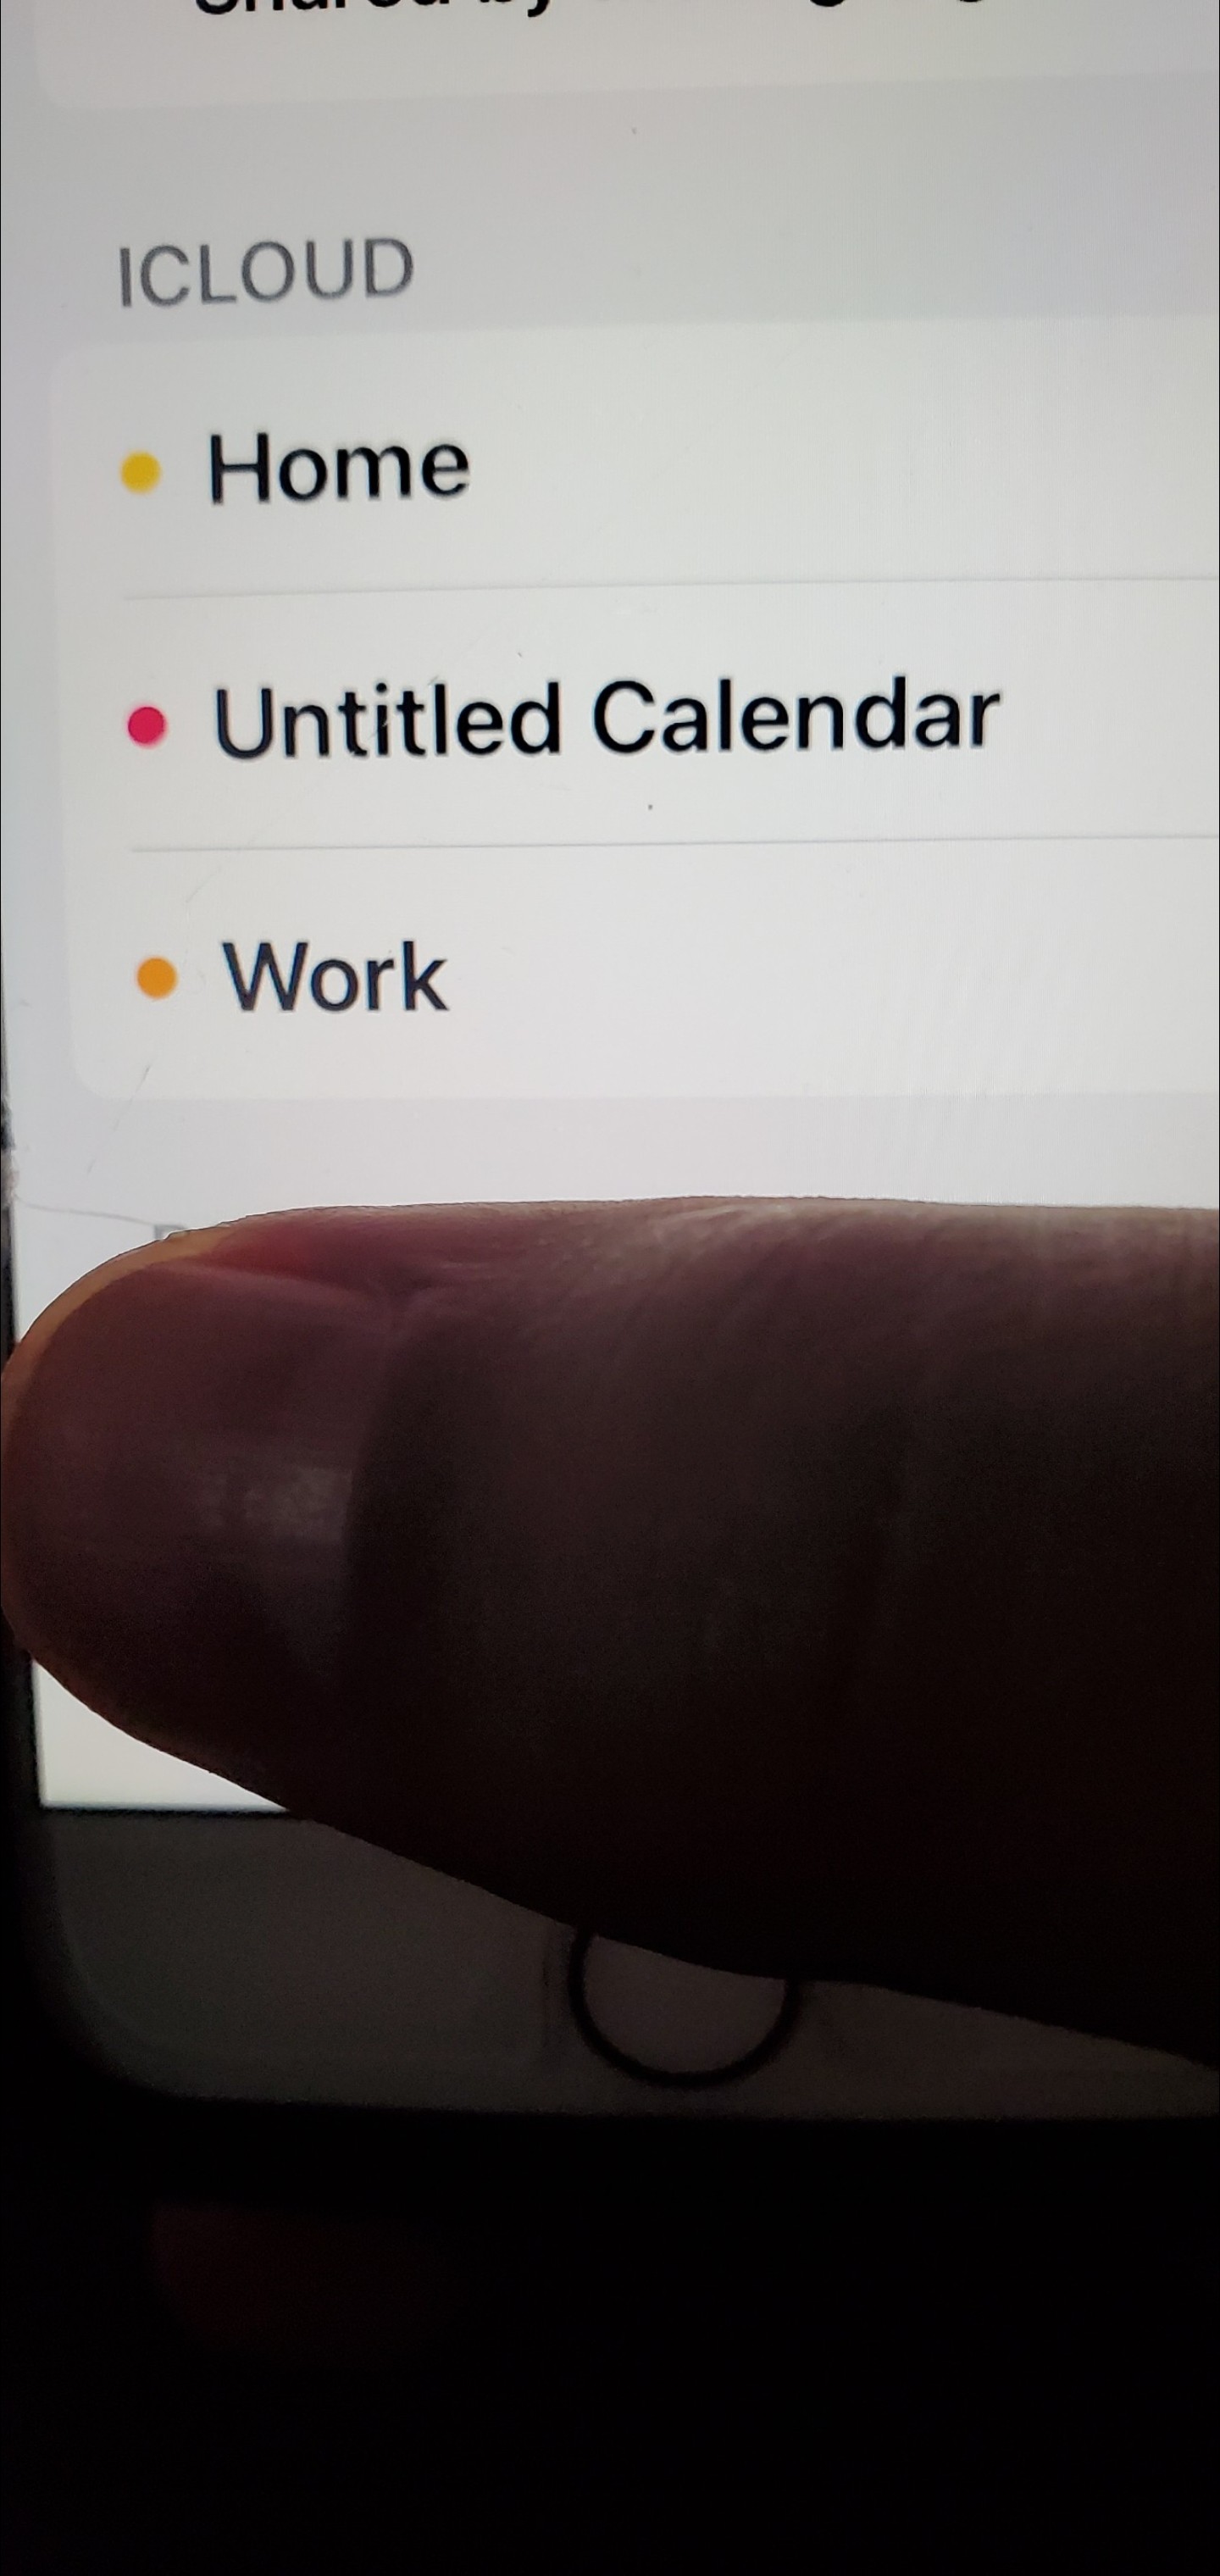 Trouble with default calendar syncing to … Apple Community